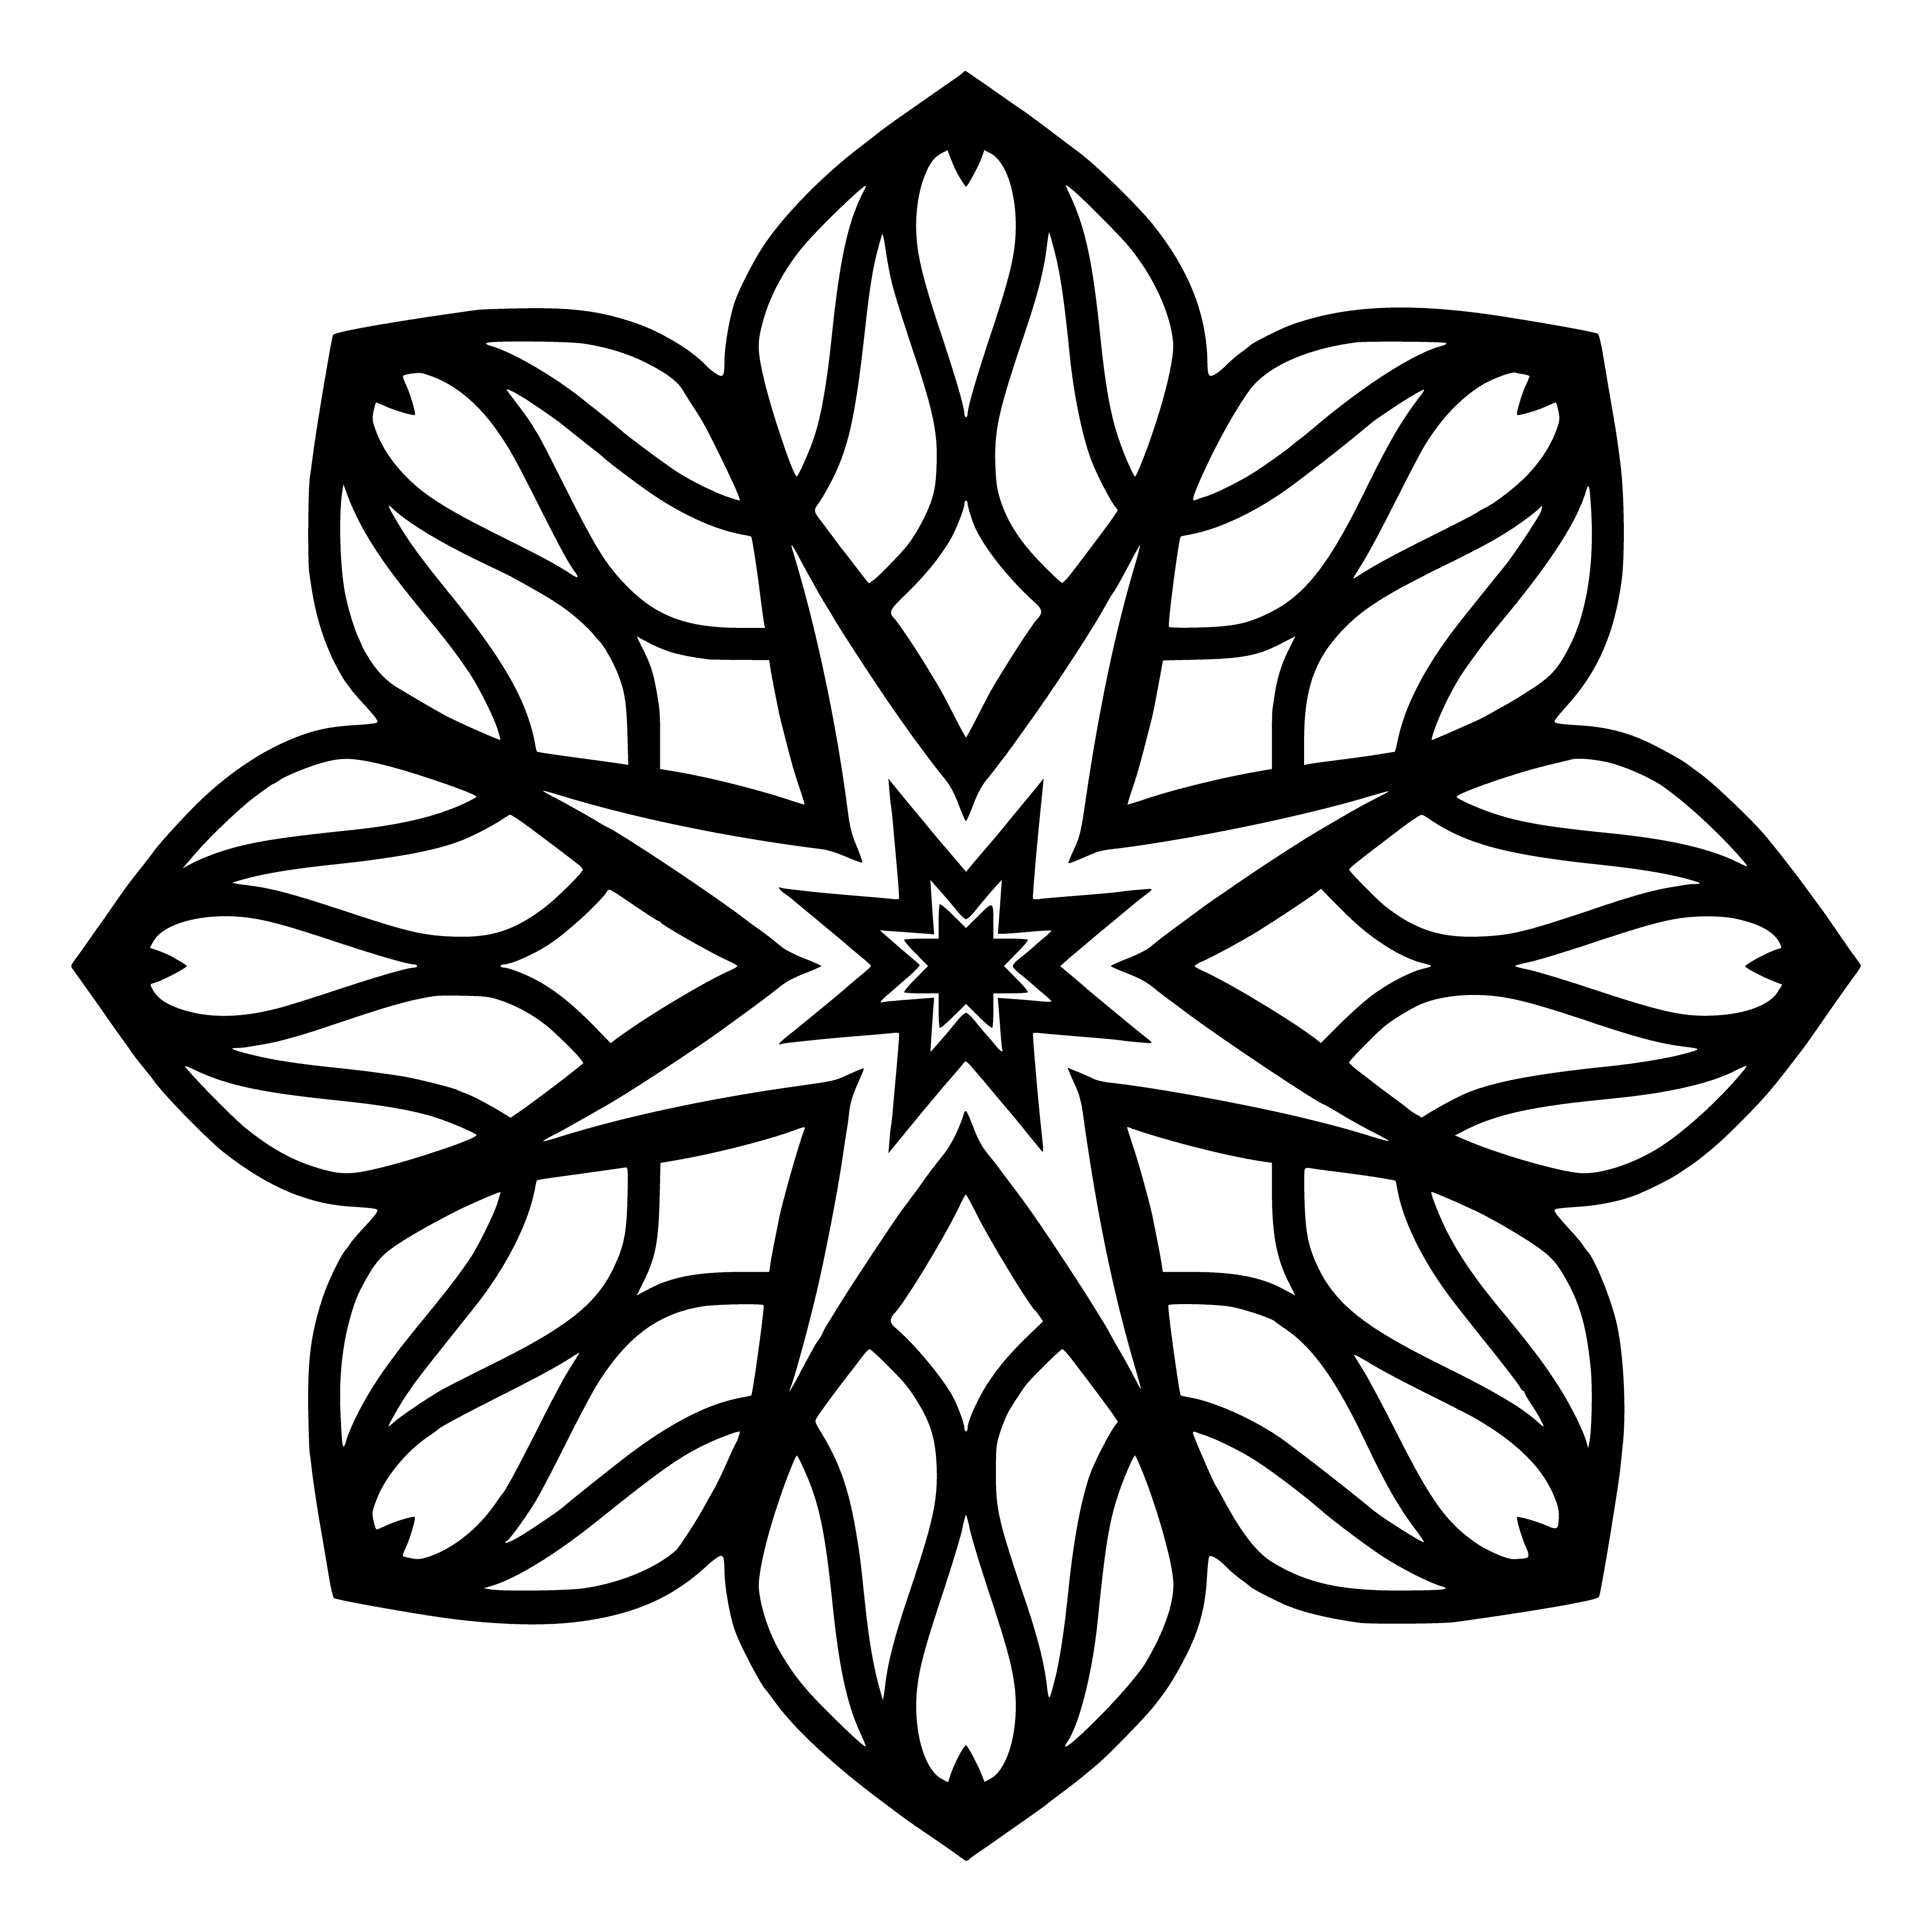 coloring page: This coloring page features a simple, radial mandala design with geometric shapes and patterns, plus small circles around the edge. #Mandalas